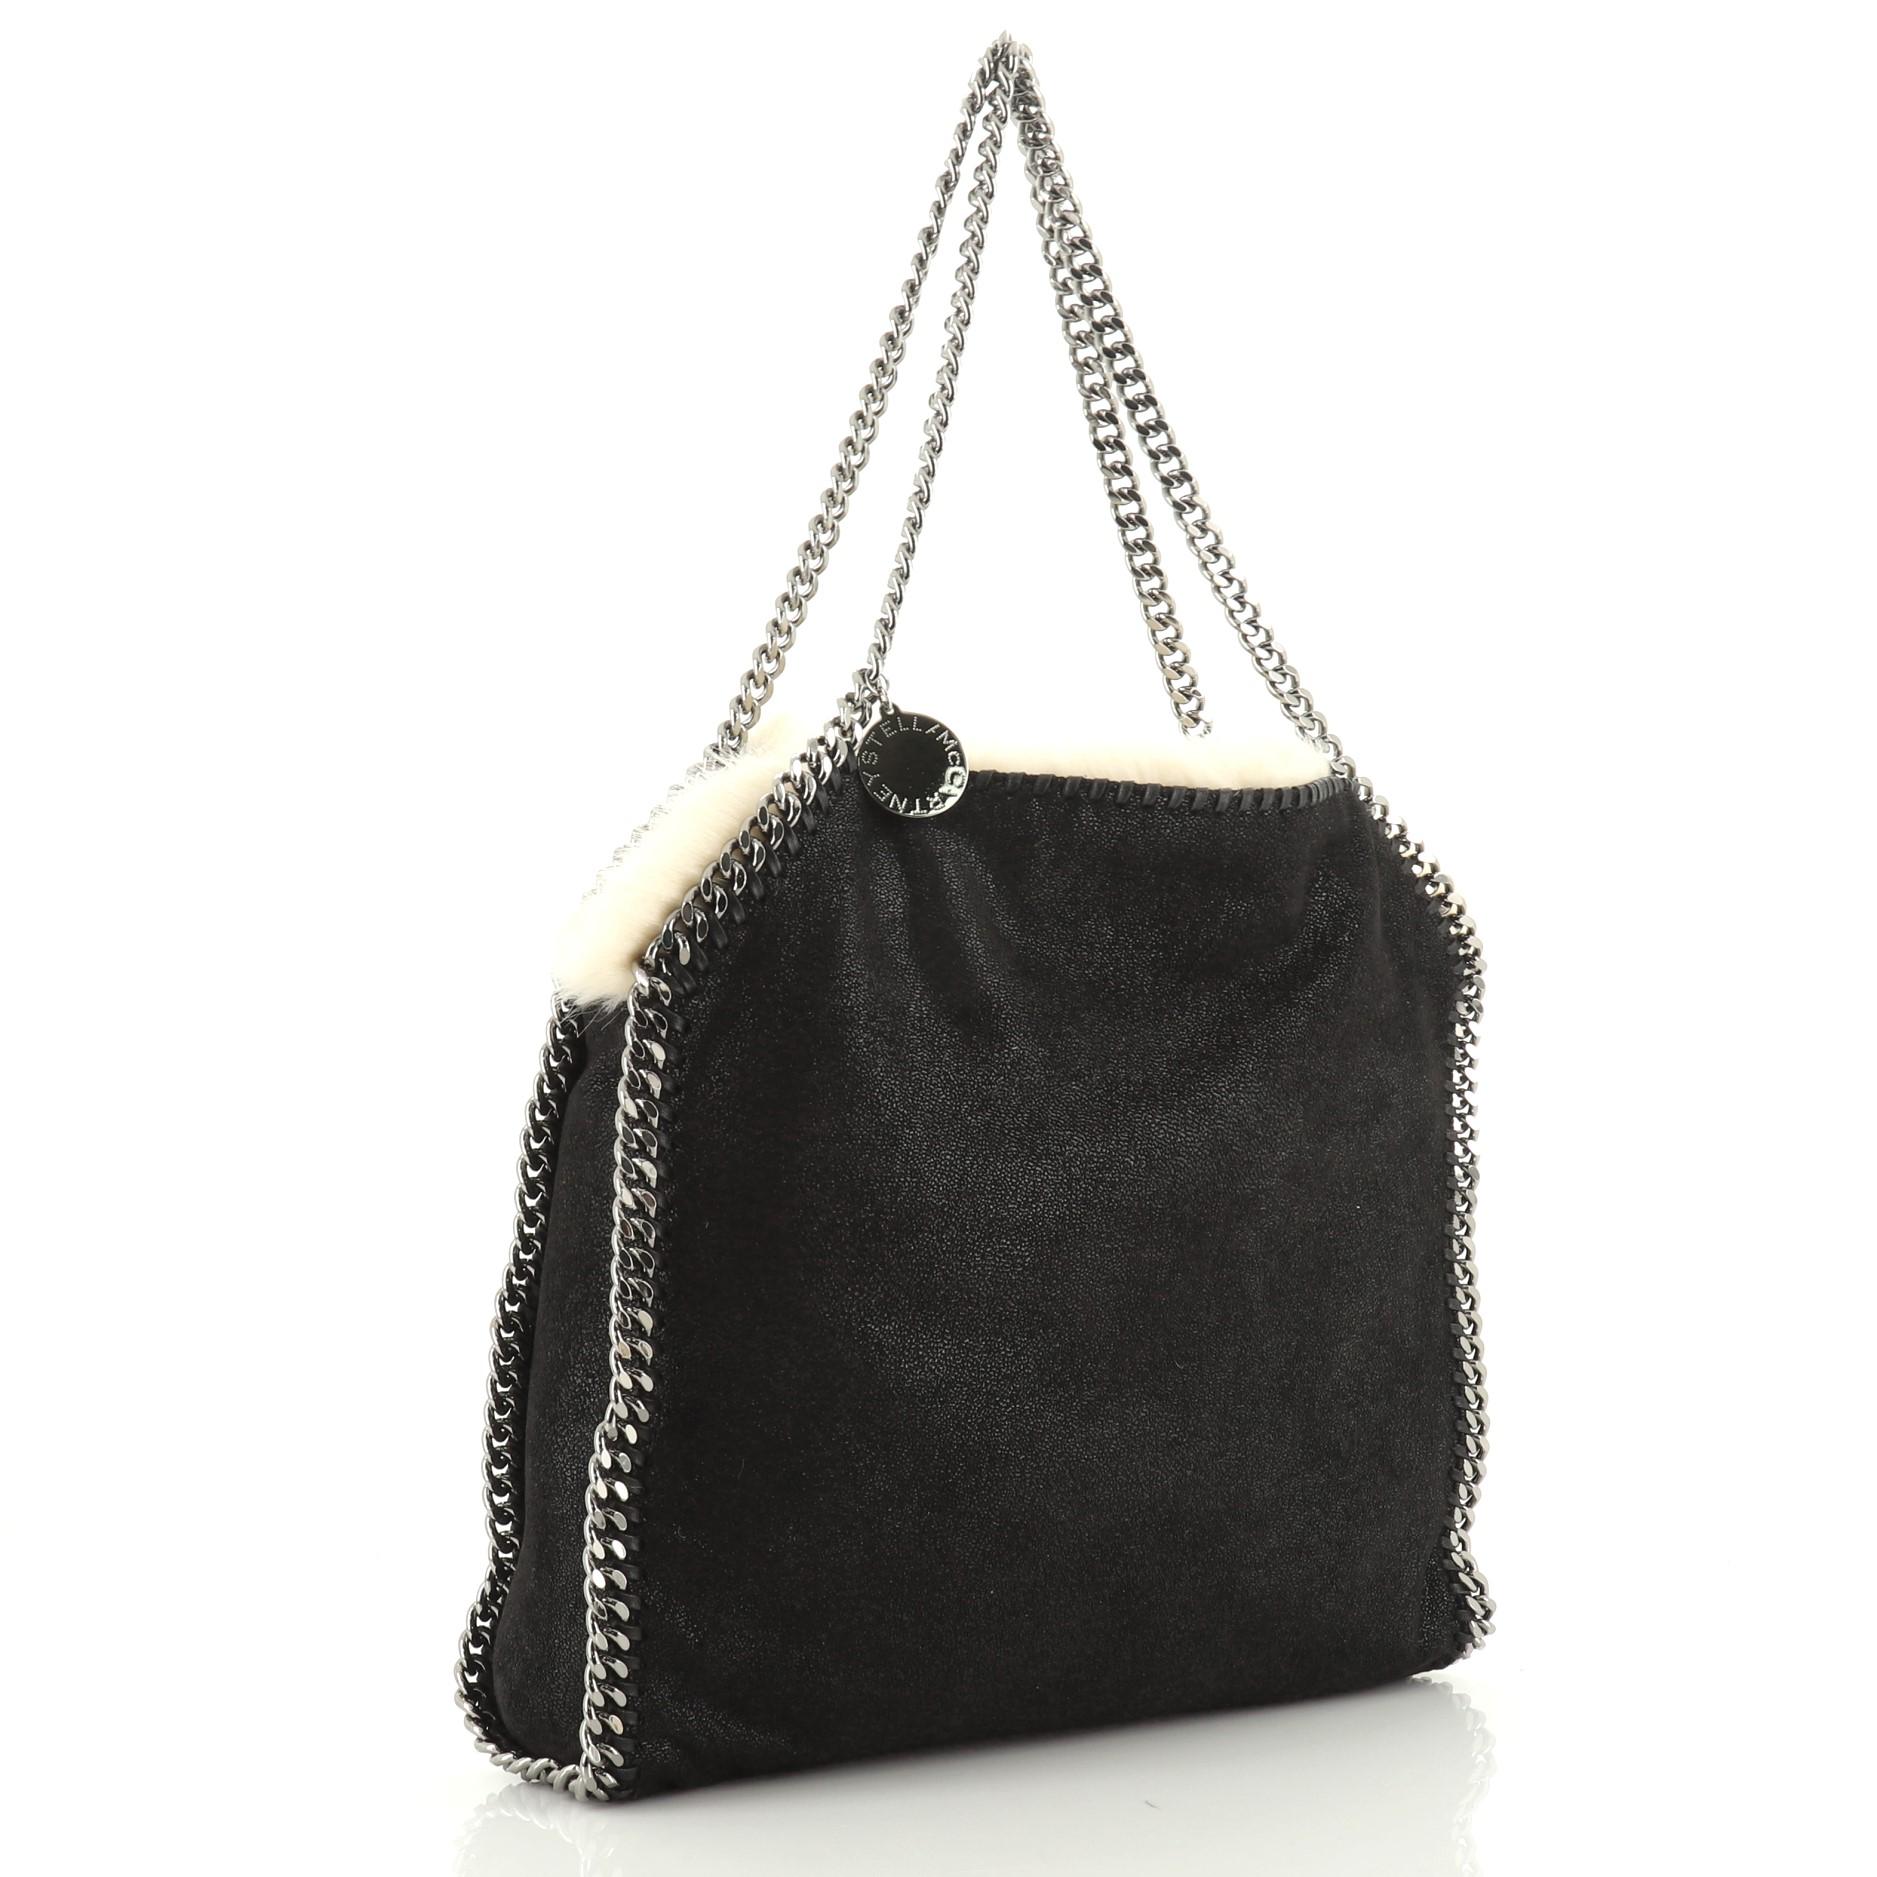 This Stella McCartney Falabella Reversible Tote Shaggy Deer and Faux Fur Small, crafted in black shaggy deer, features chain link strap and trim, whipstitched edges, and gunmetal-tone hardware. It opens to a neutral faux fur interior. 

Estimated